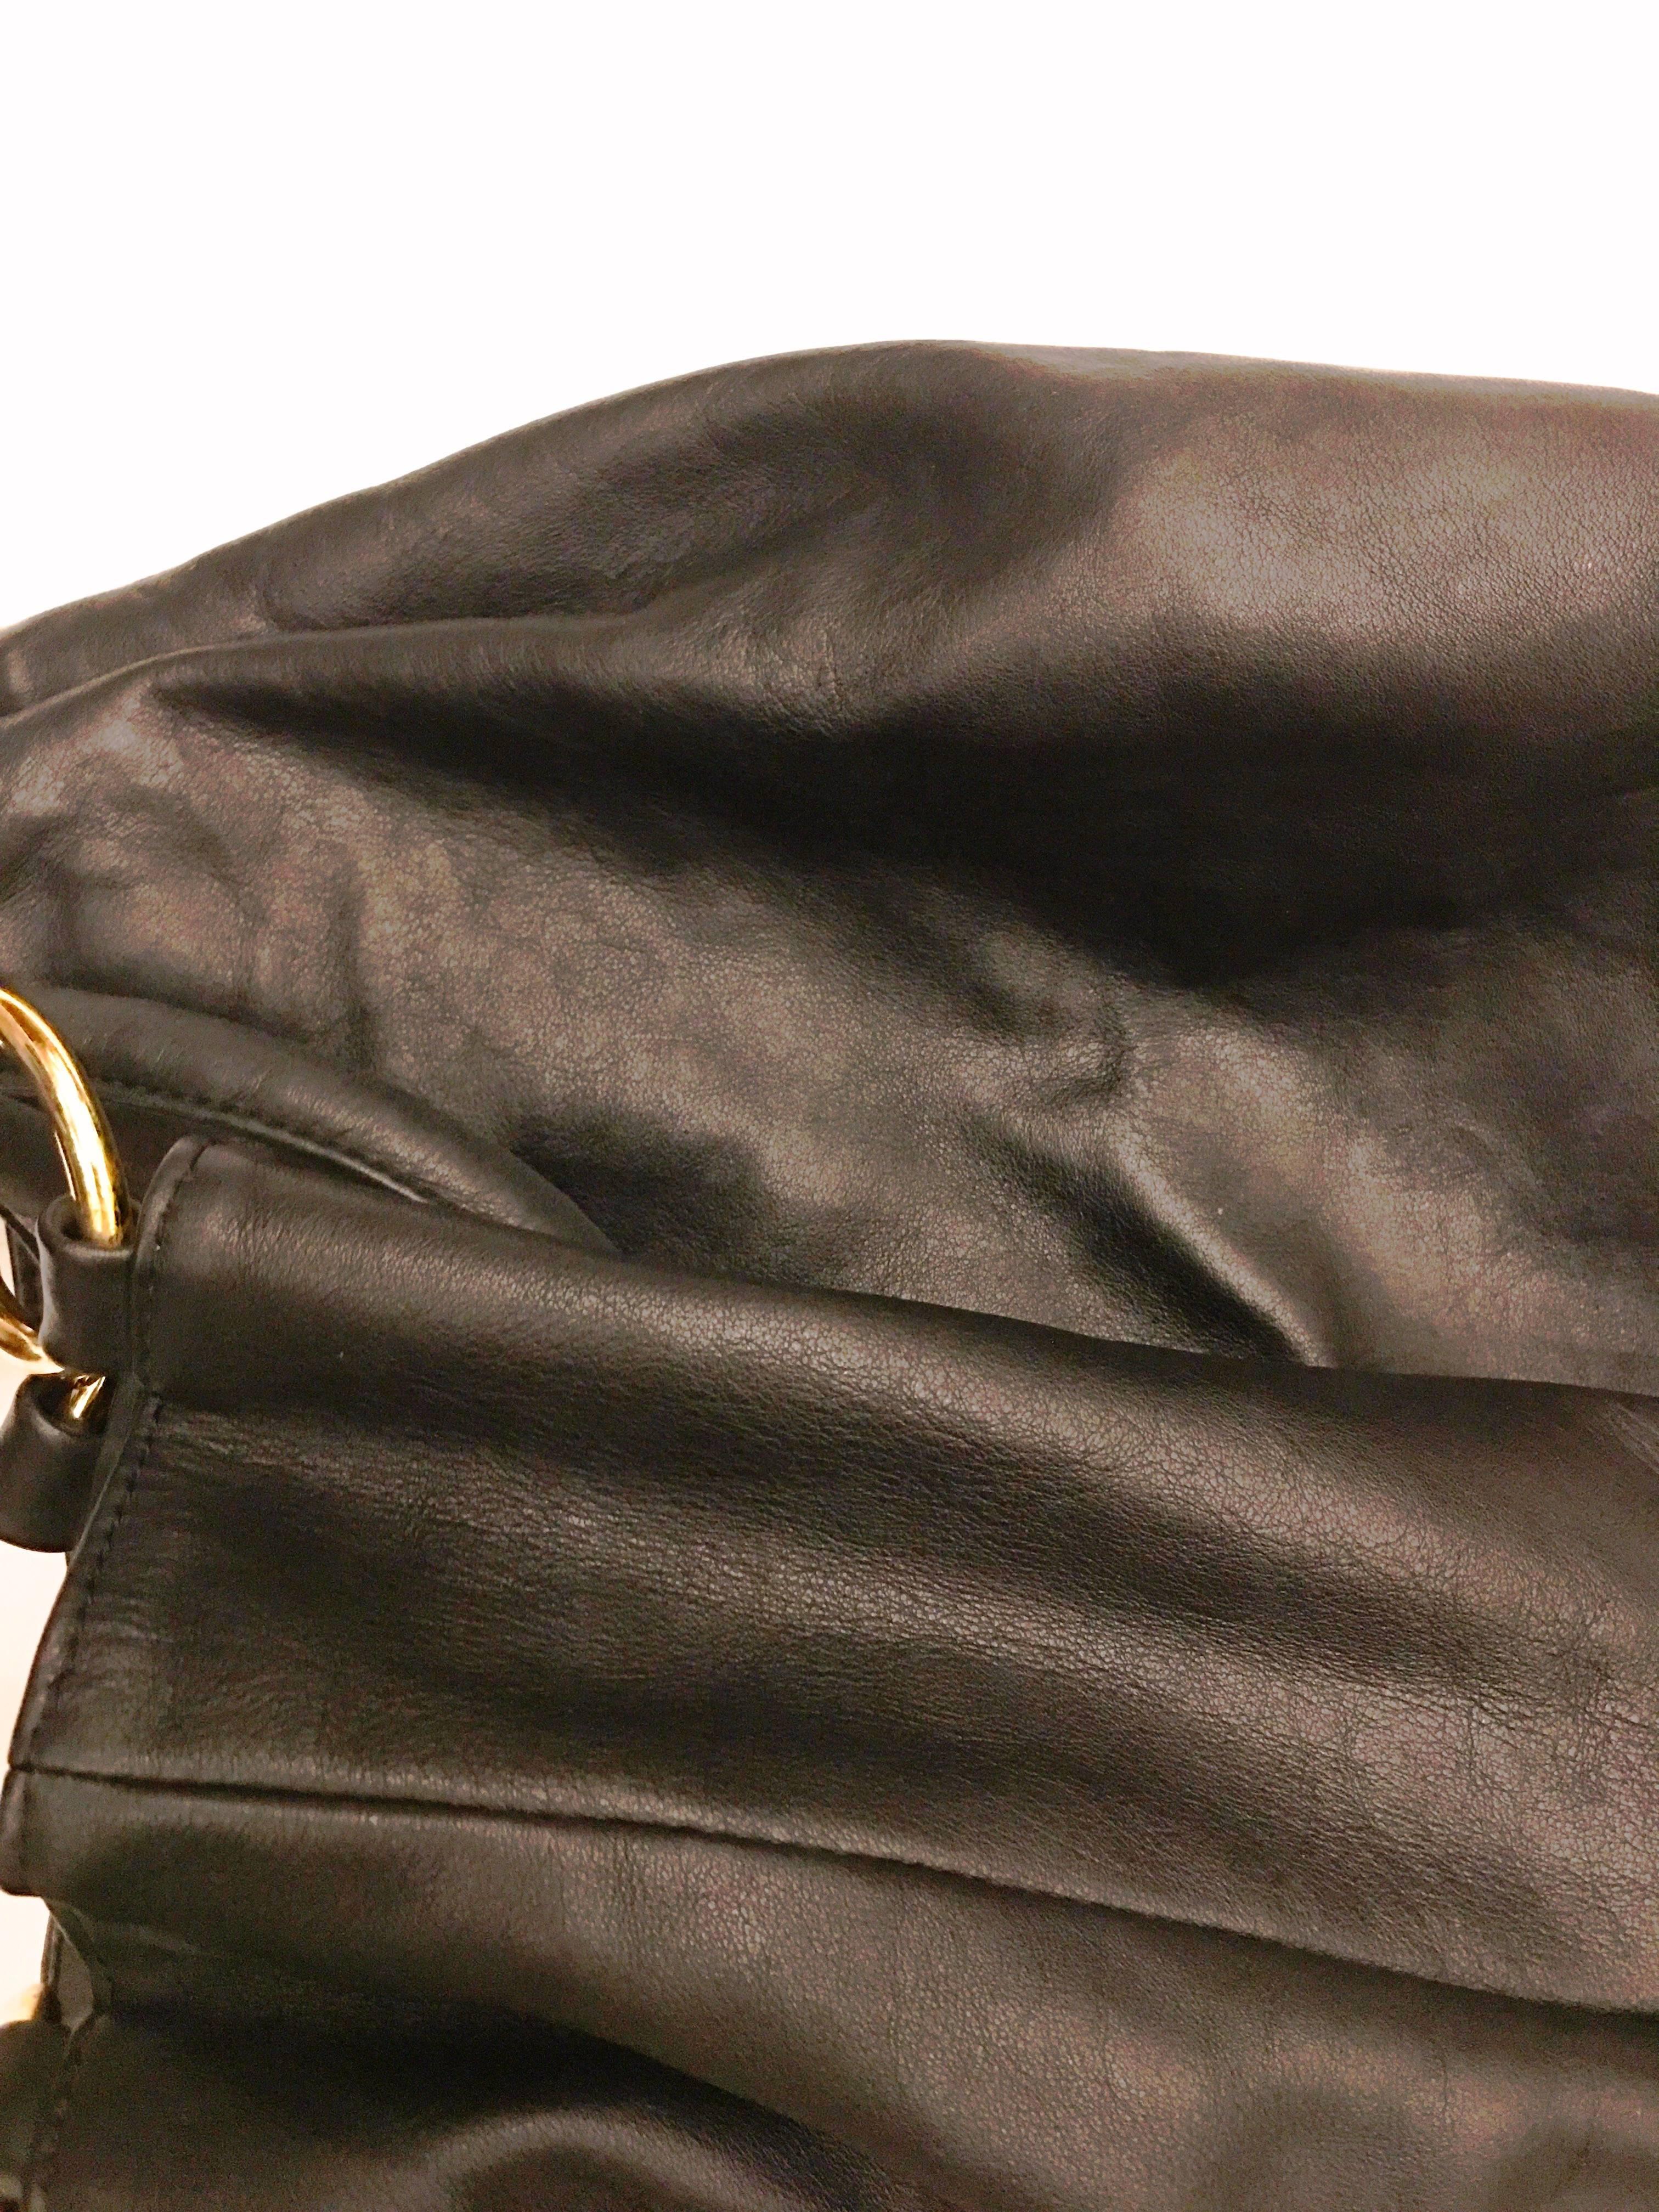 Black leather tote bag with 4 gold tone rings at handle. Handle is one single leather strap that loops around through the gold rings. Balmain crest and logo on gold tone disk at front of the bag. Two zipper pockets on inside of the bag. One larger,